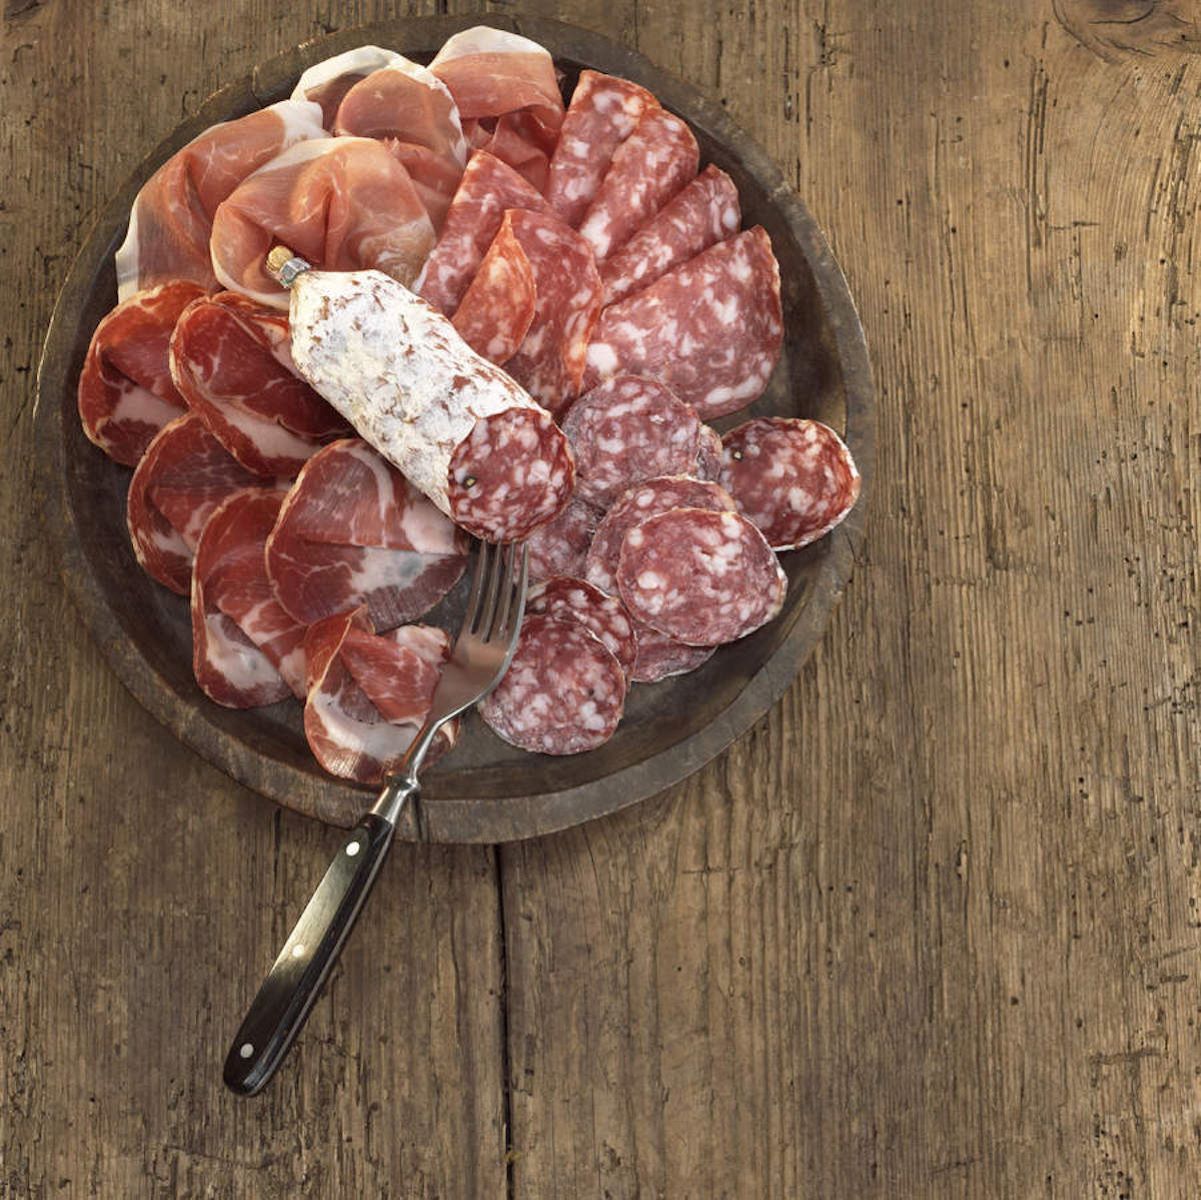 How To Store Salami